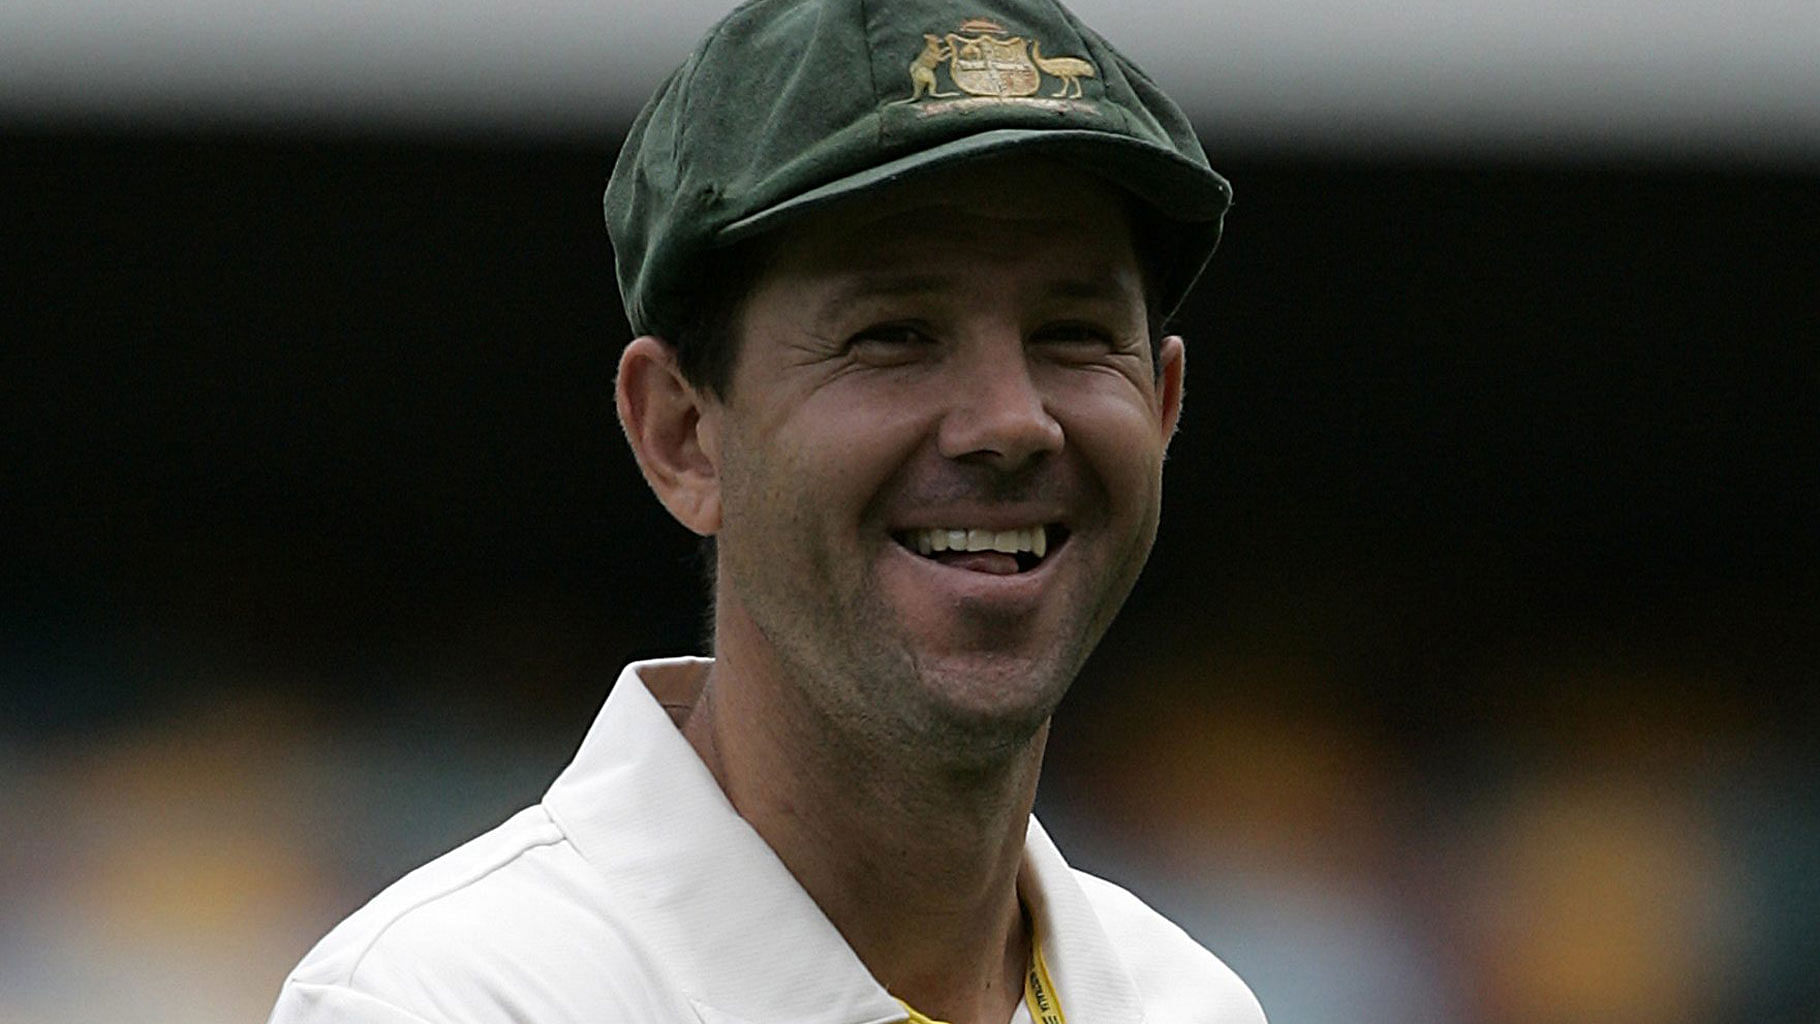 Former Australia skipper Ricky Ponting has revealed that it was his teammate Shane Warne who had given him the nickname ‘Punter.’